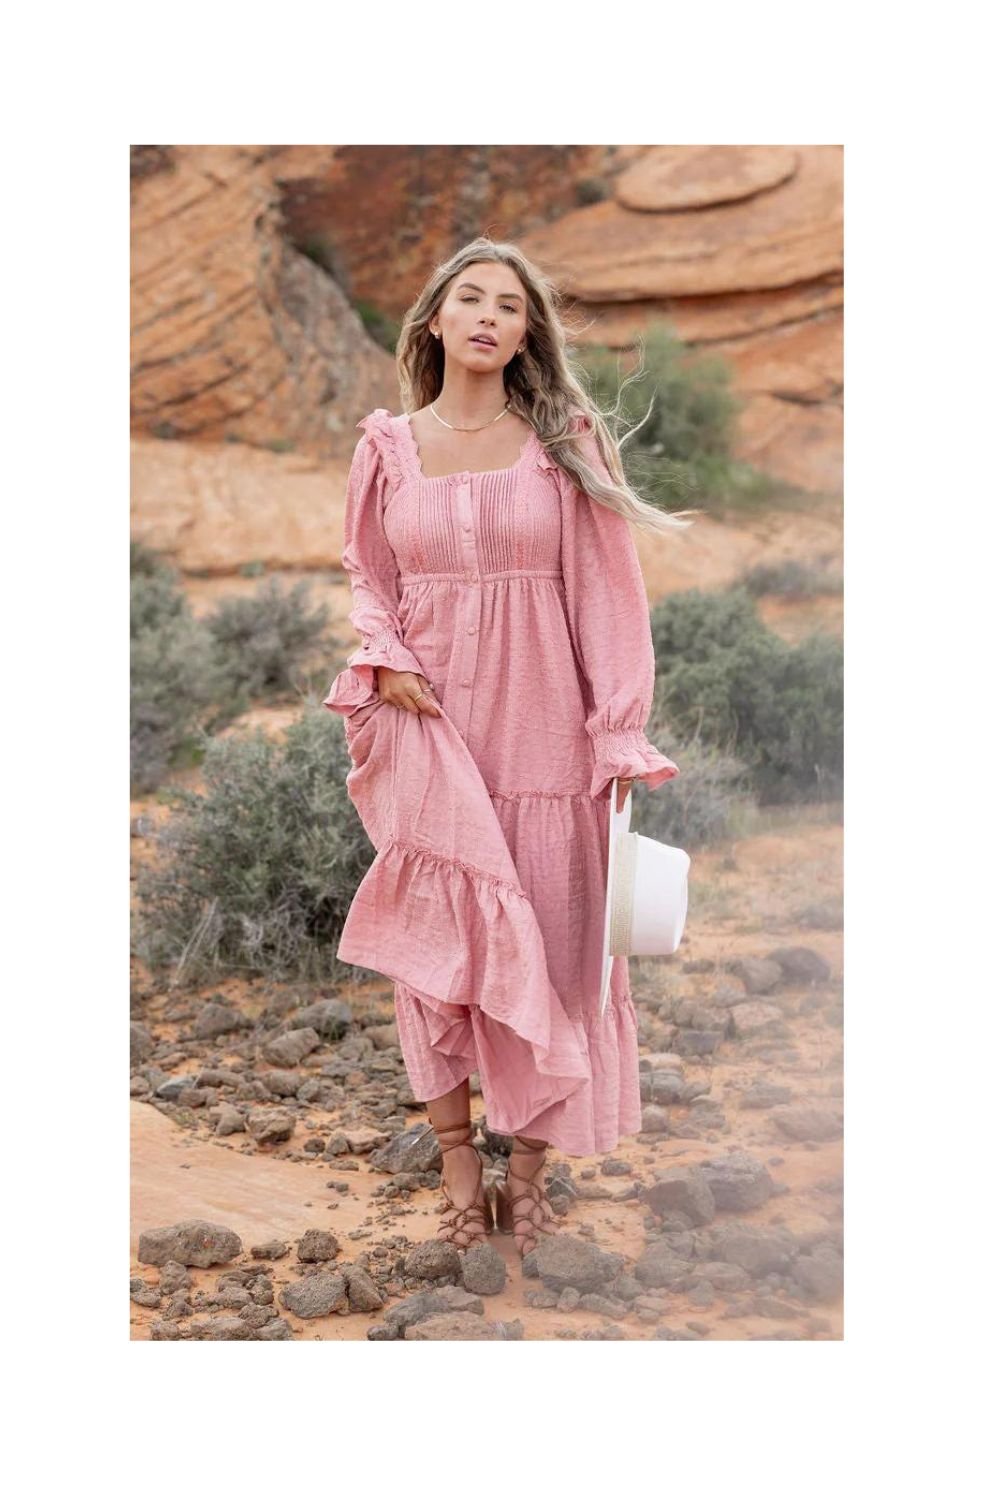 https://www.fehrnvi.com/collections/all-new-arrivals/products/milan-pleated-ruffle-maxi-dress?ref=rlsznx8e